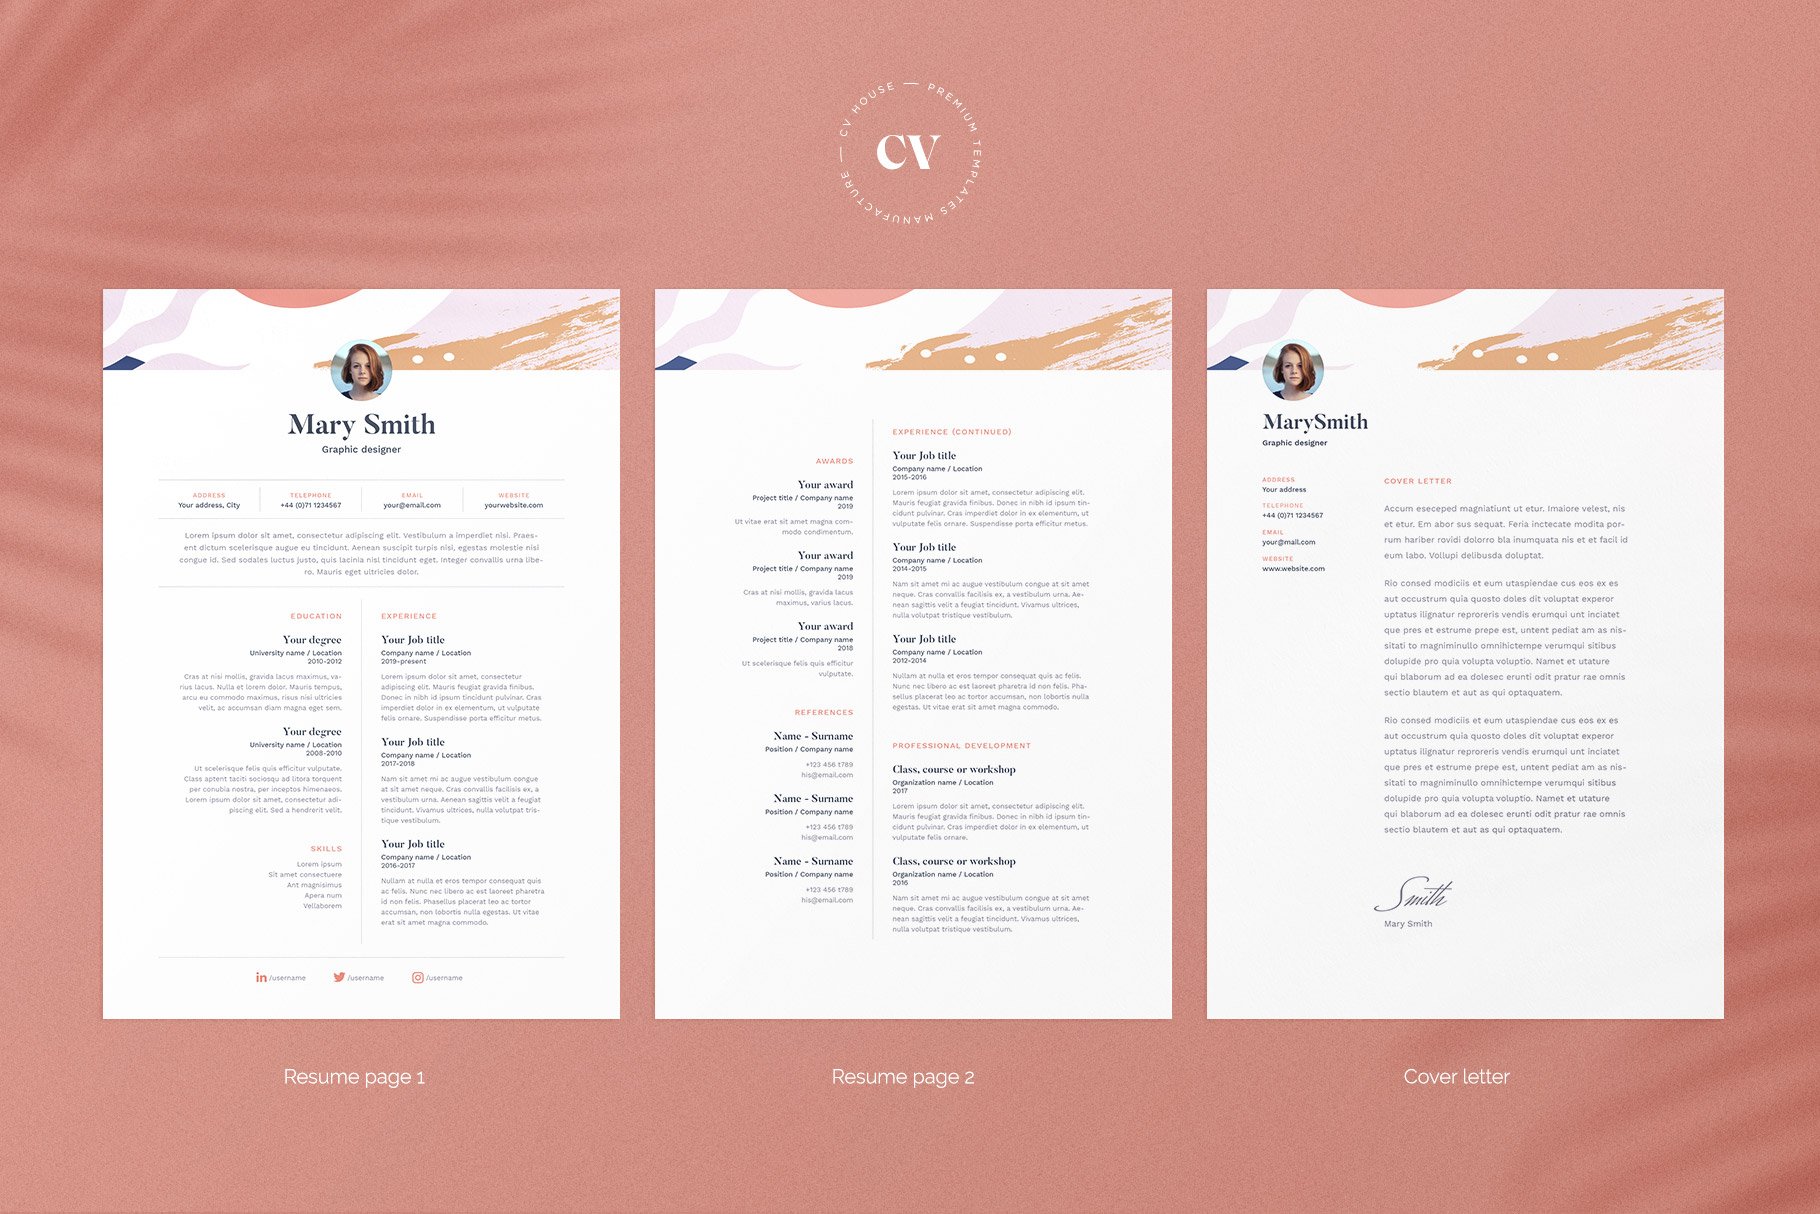 cv resume template with cover letter word photoshop indesign mary overview 595